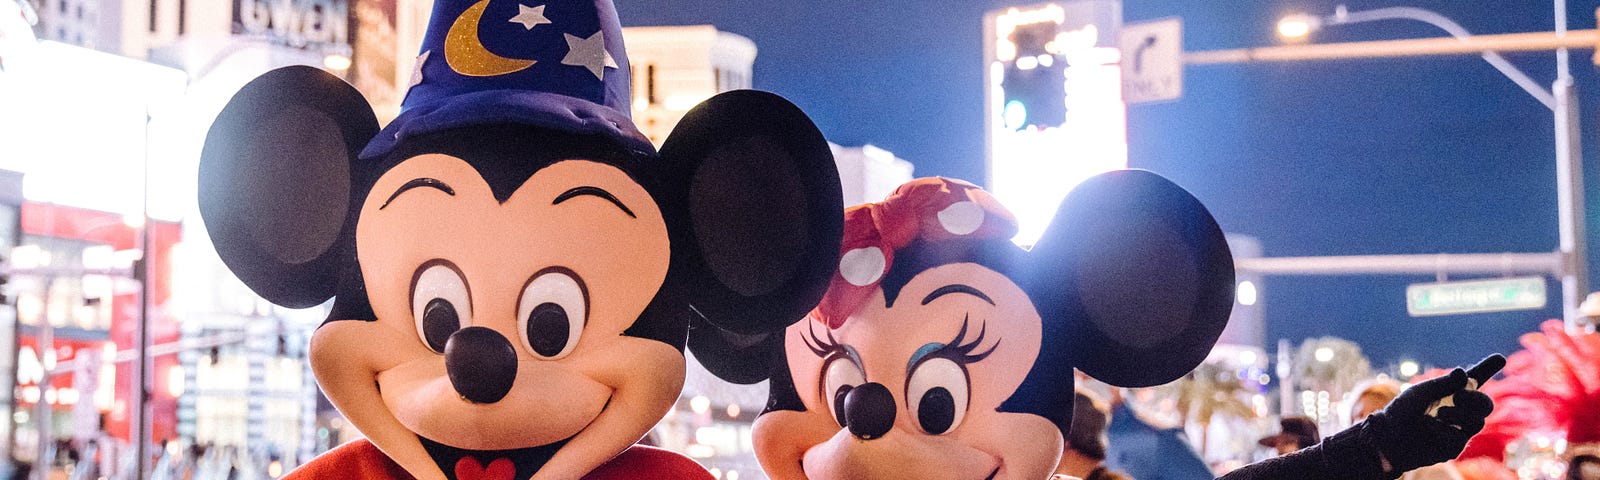 A phto of Mickey and Minnie Mouse